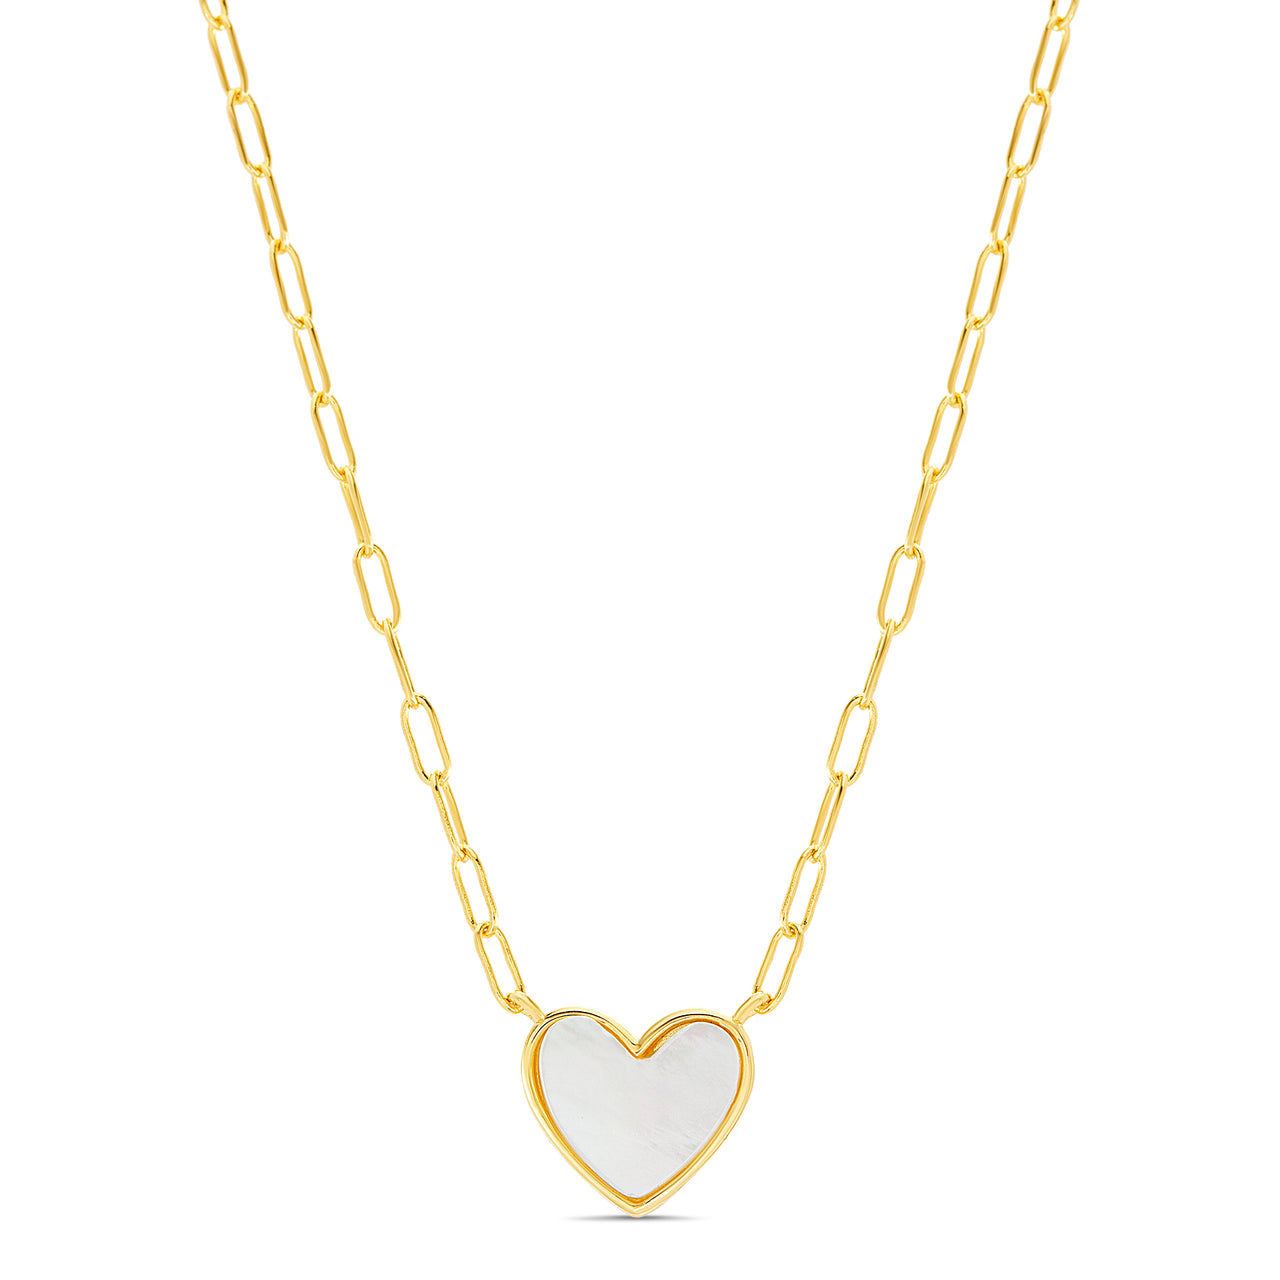 Lesa Michele Mother of Pearl Heart Necklace in Yellow Gold Plated Sterling silver